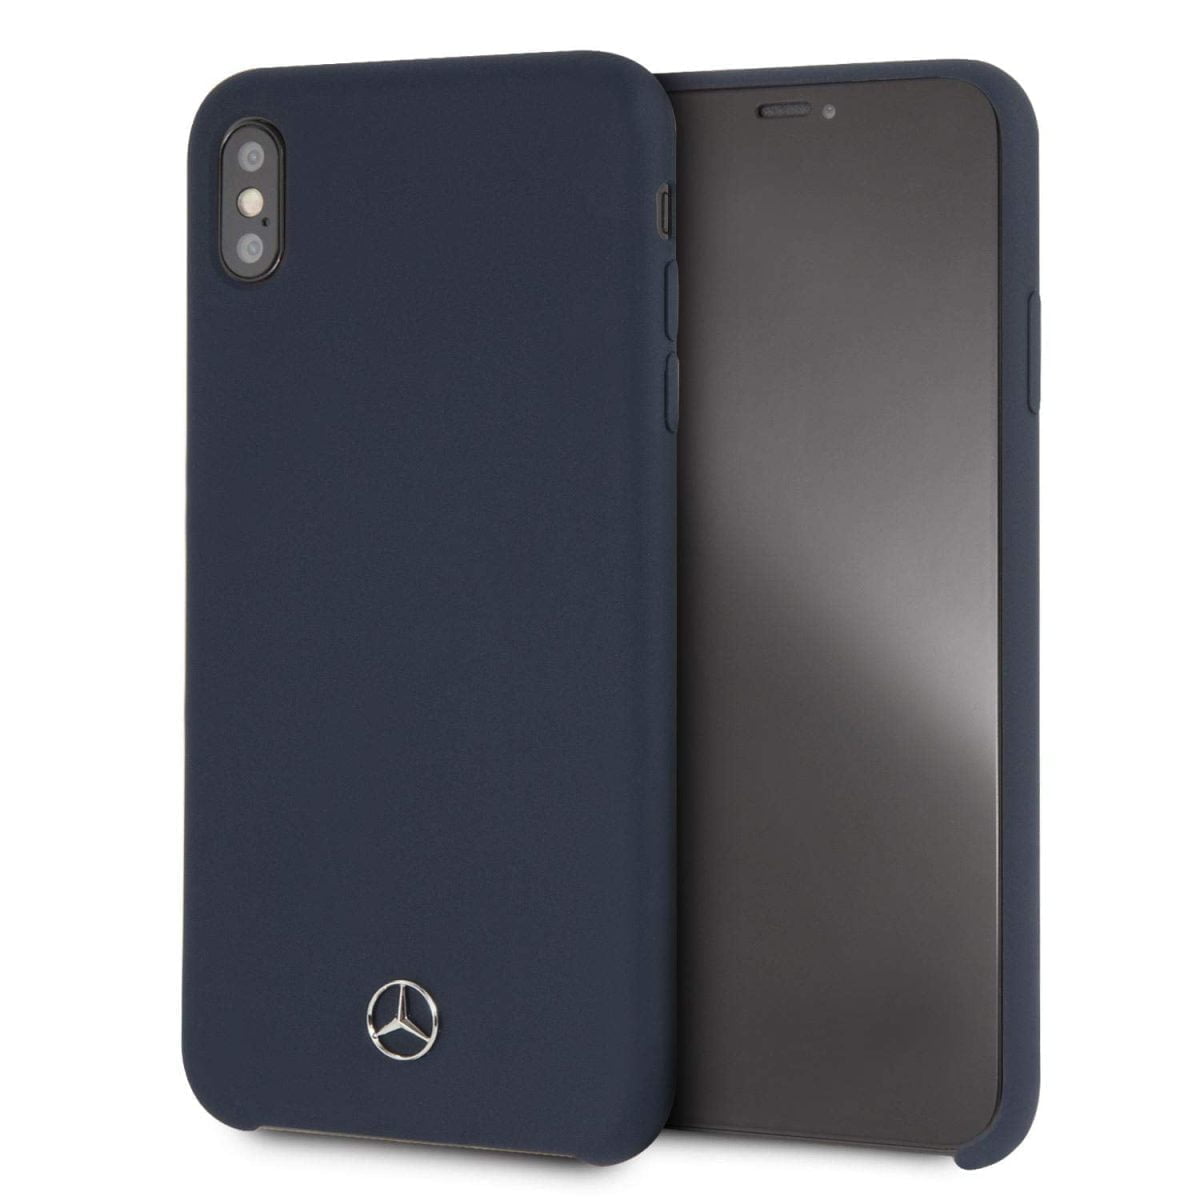 Mercedes Benz Iphone Xs Max Liquid Silicon Silcon Case With Microfiber Lining Navy 01 This Hard Silicone Soft Case With A Sculpted Metallic Mercedes Benz Logo For A 3D Effect Gives You A Classic And Elegant Appeal To Your Handheld Device It Has Easy Accessibility For All Ports And Buttons. Case Compatible With Wireless Chargers. Soft Microfiber Interior, Easy To Hold &Amp;Amp; Easy Snap-On Design Makes It Fast And Easy To Install Or Take Off In Seconds This Case Provides Both The Ultimate Luxury Experience And Protection From Scratches And Abrasions By Slightly Raised Edges Iphone Silicon Case Iphone Xs Max Liquid Silicon - Silicon Case With Microfiber Lining (Navy Blue) Mercedes-Benz